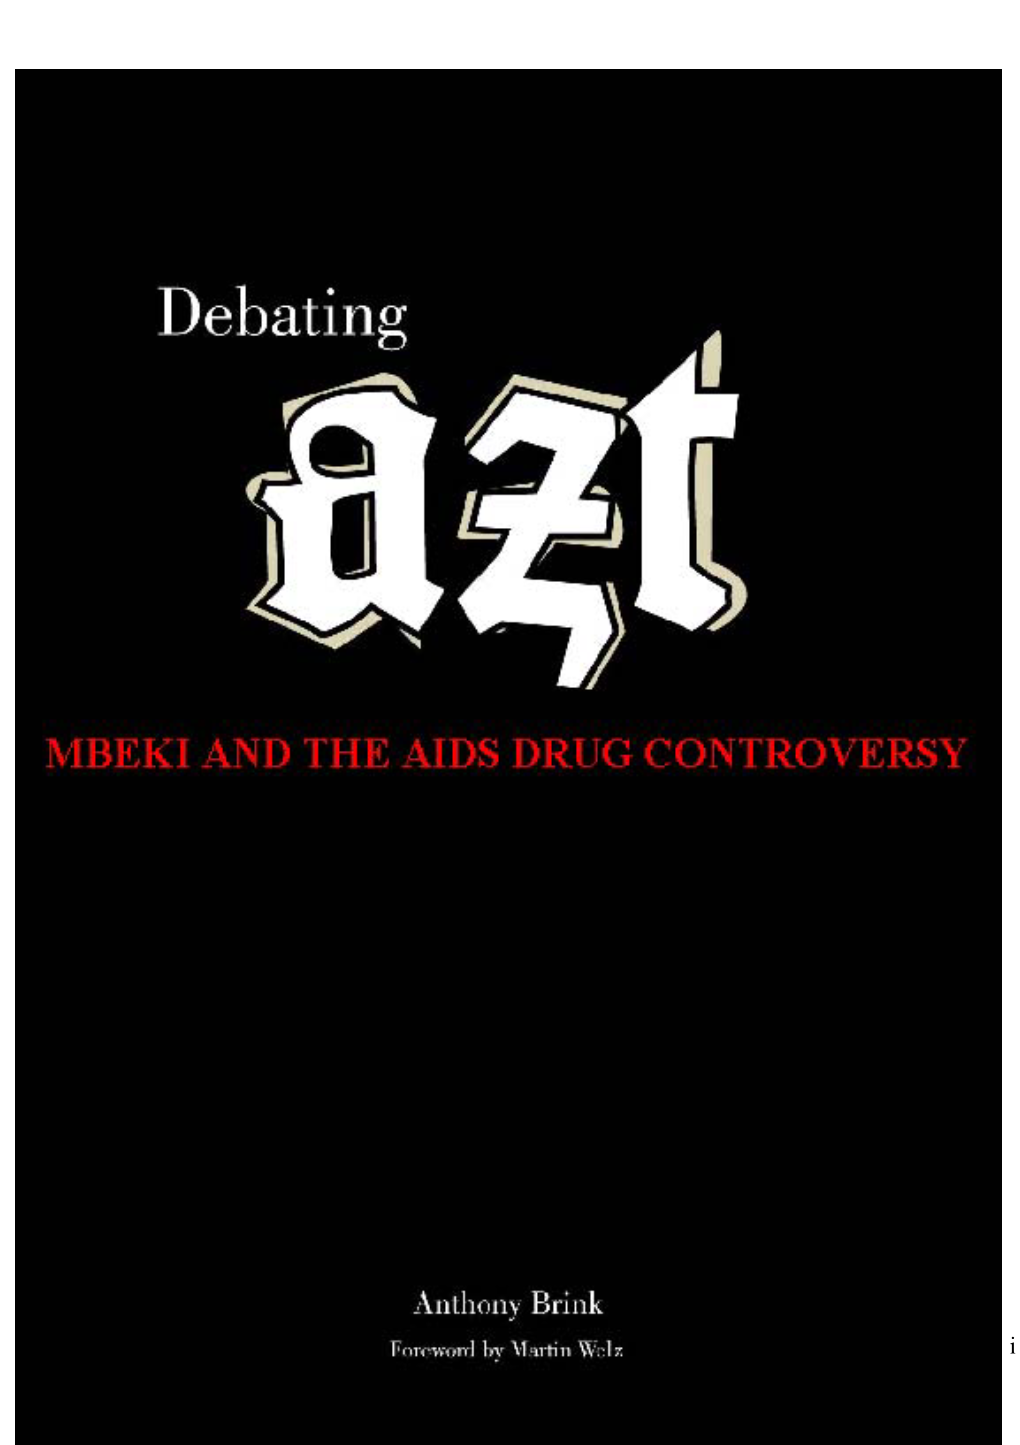 Debating AZT: Mbeki and the AIDS Drug Controversy by Anthony Brink